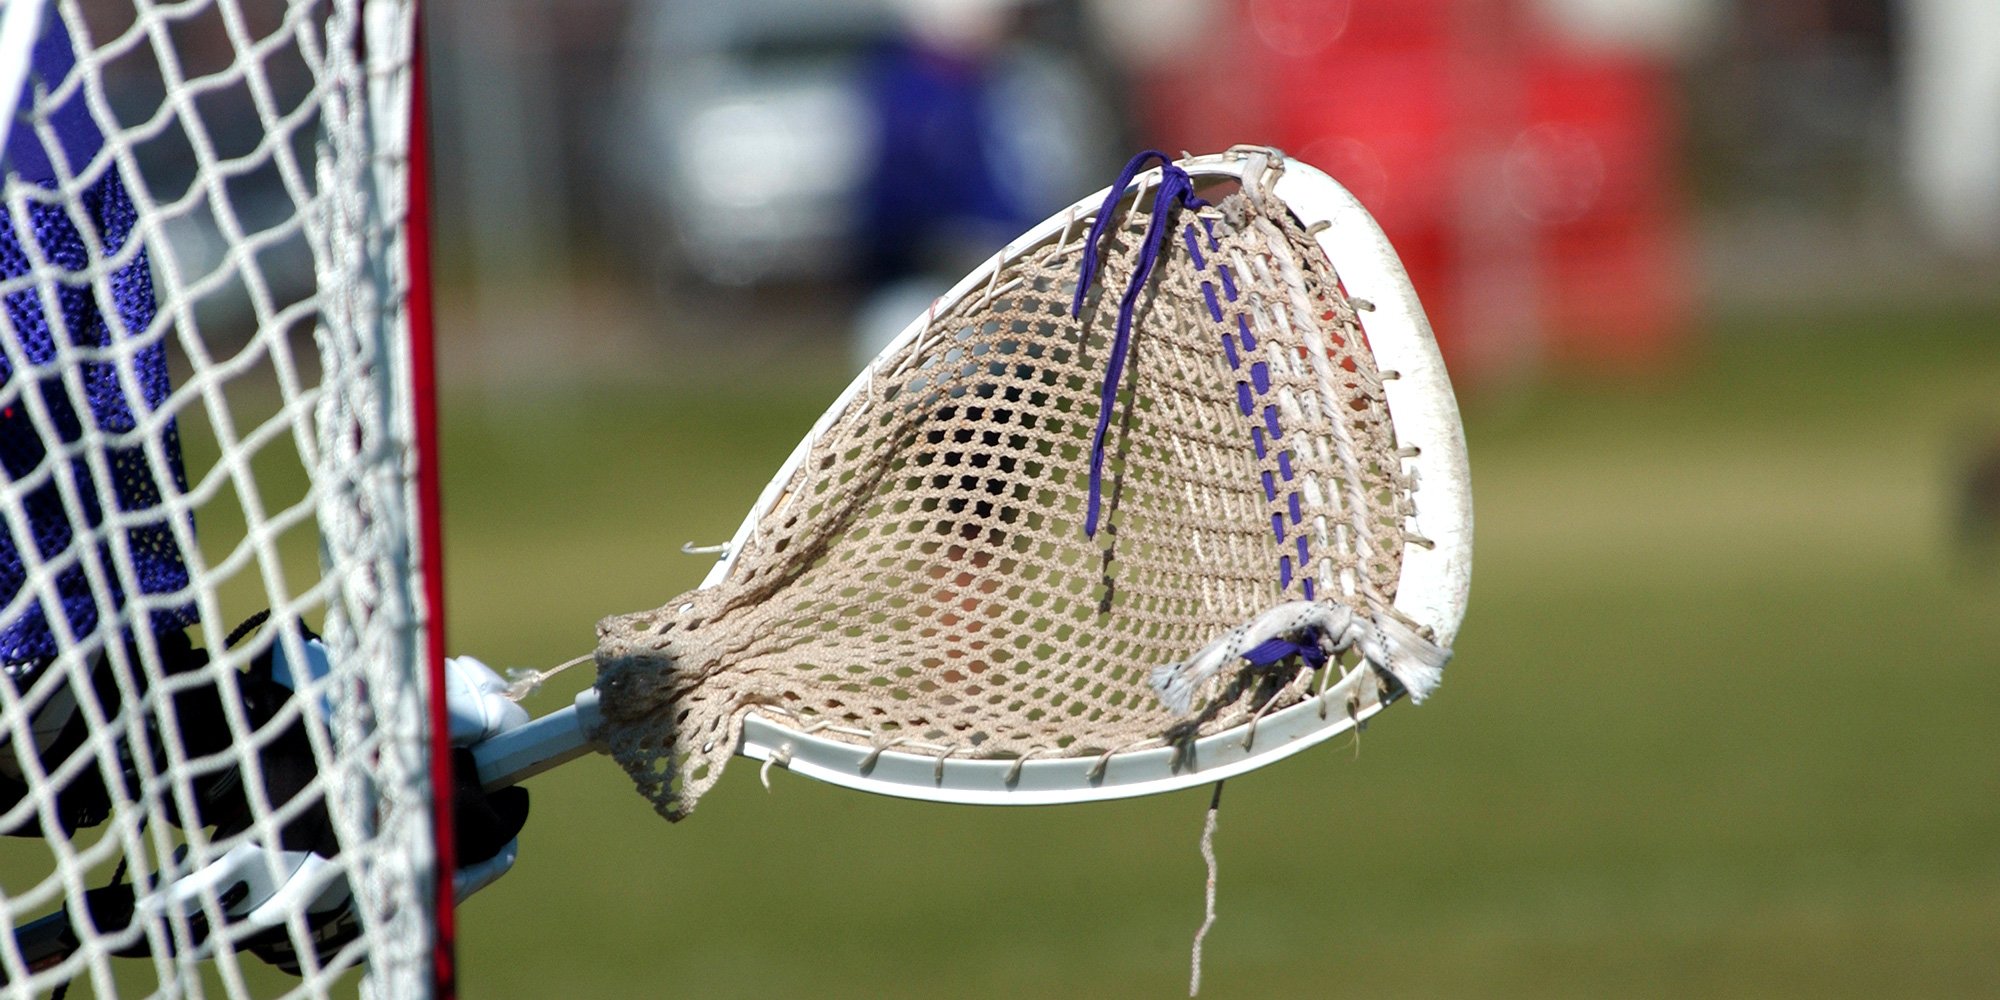 North American Indigenous Games lacrosse stick